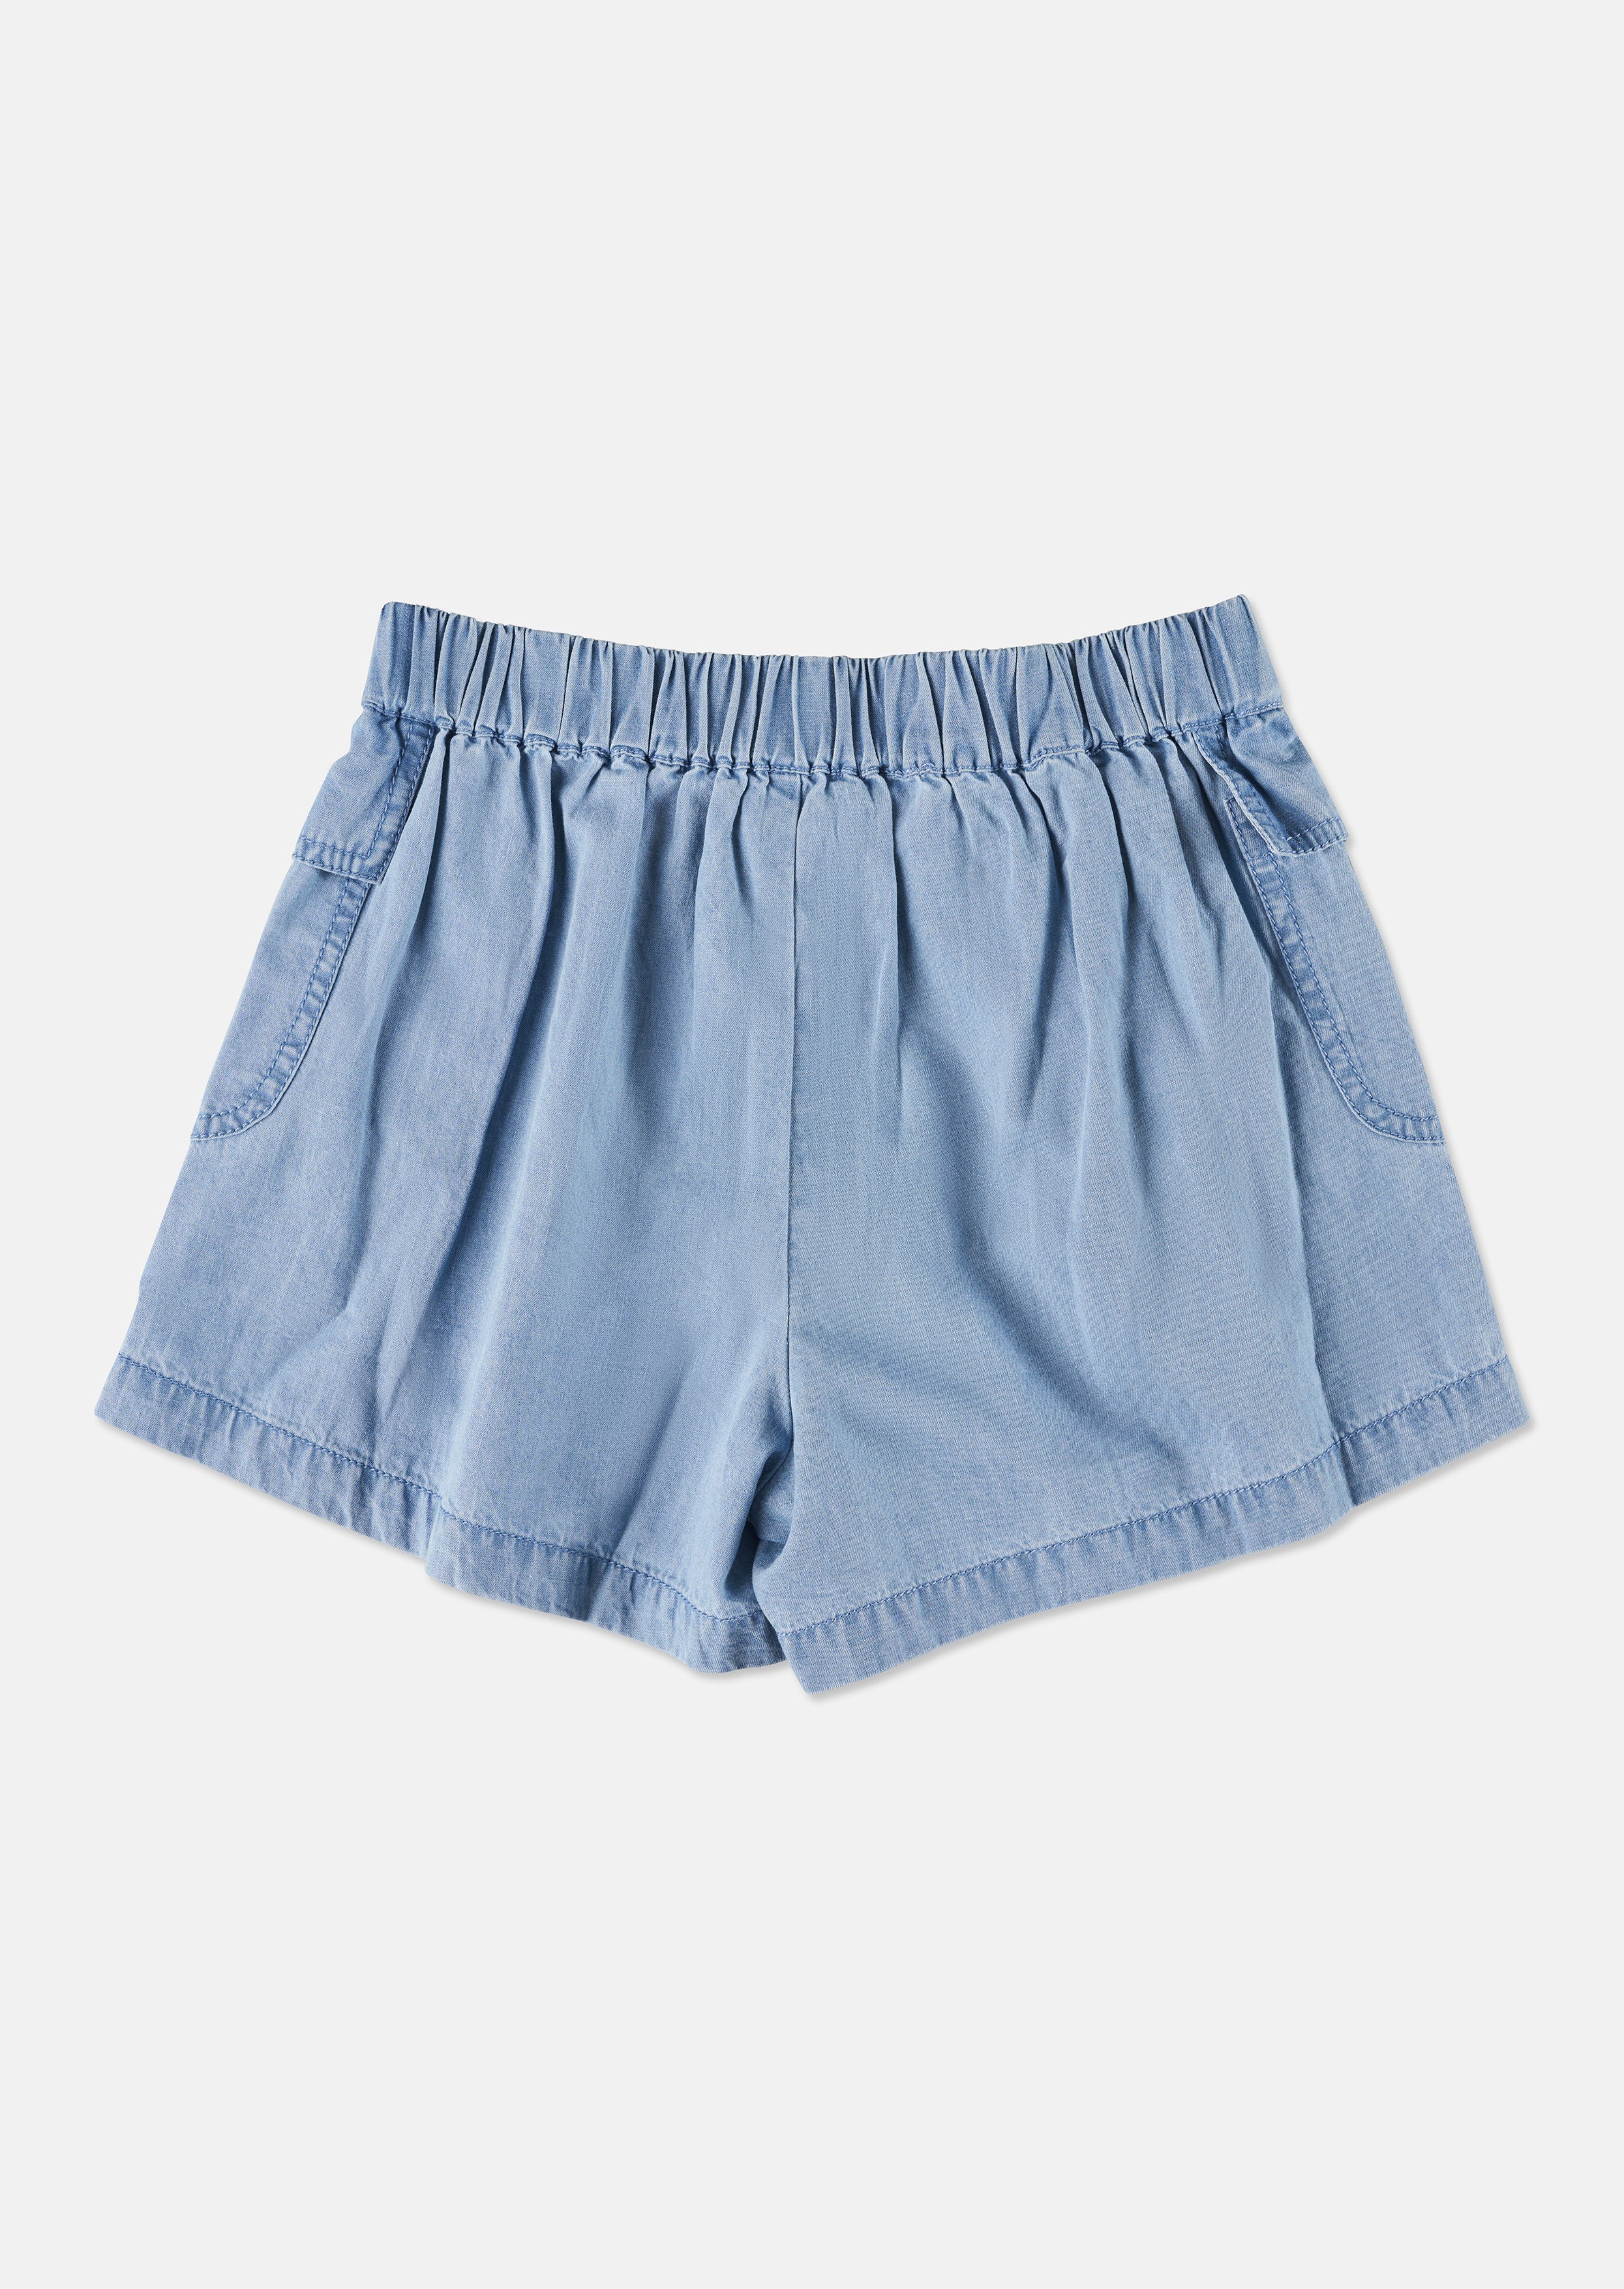 Girls Pleated Woven Blue Shorts